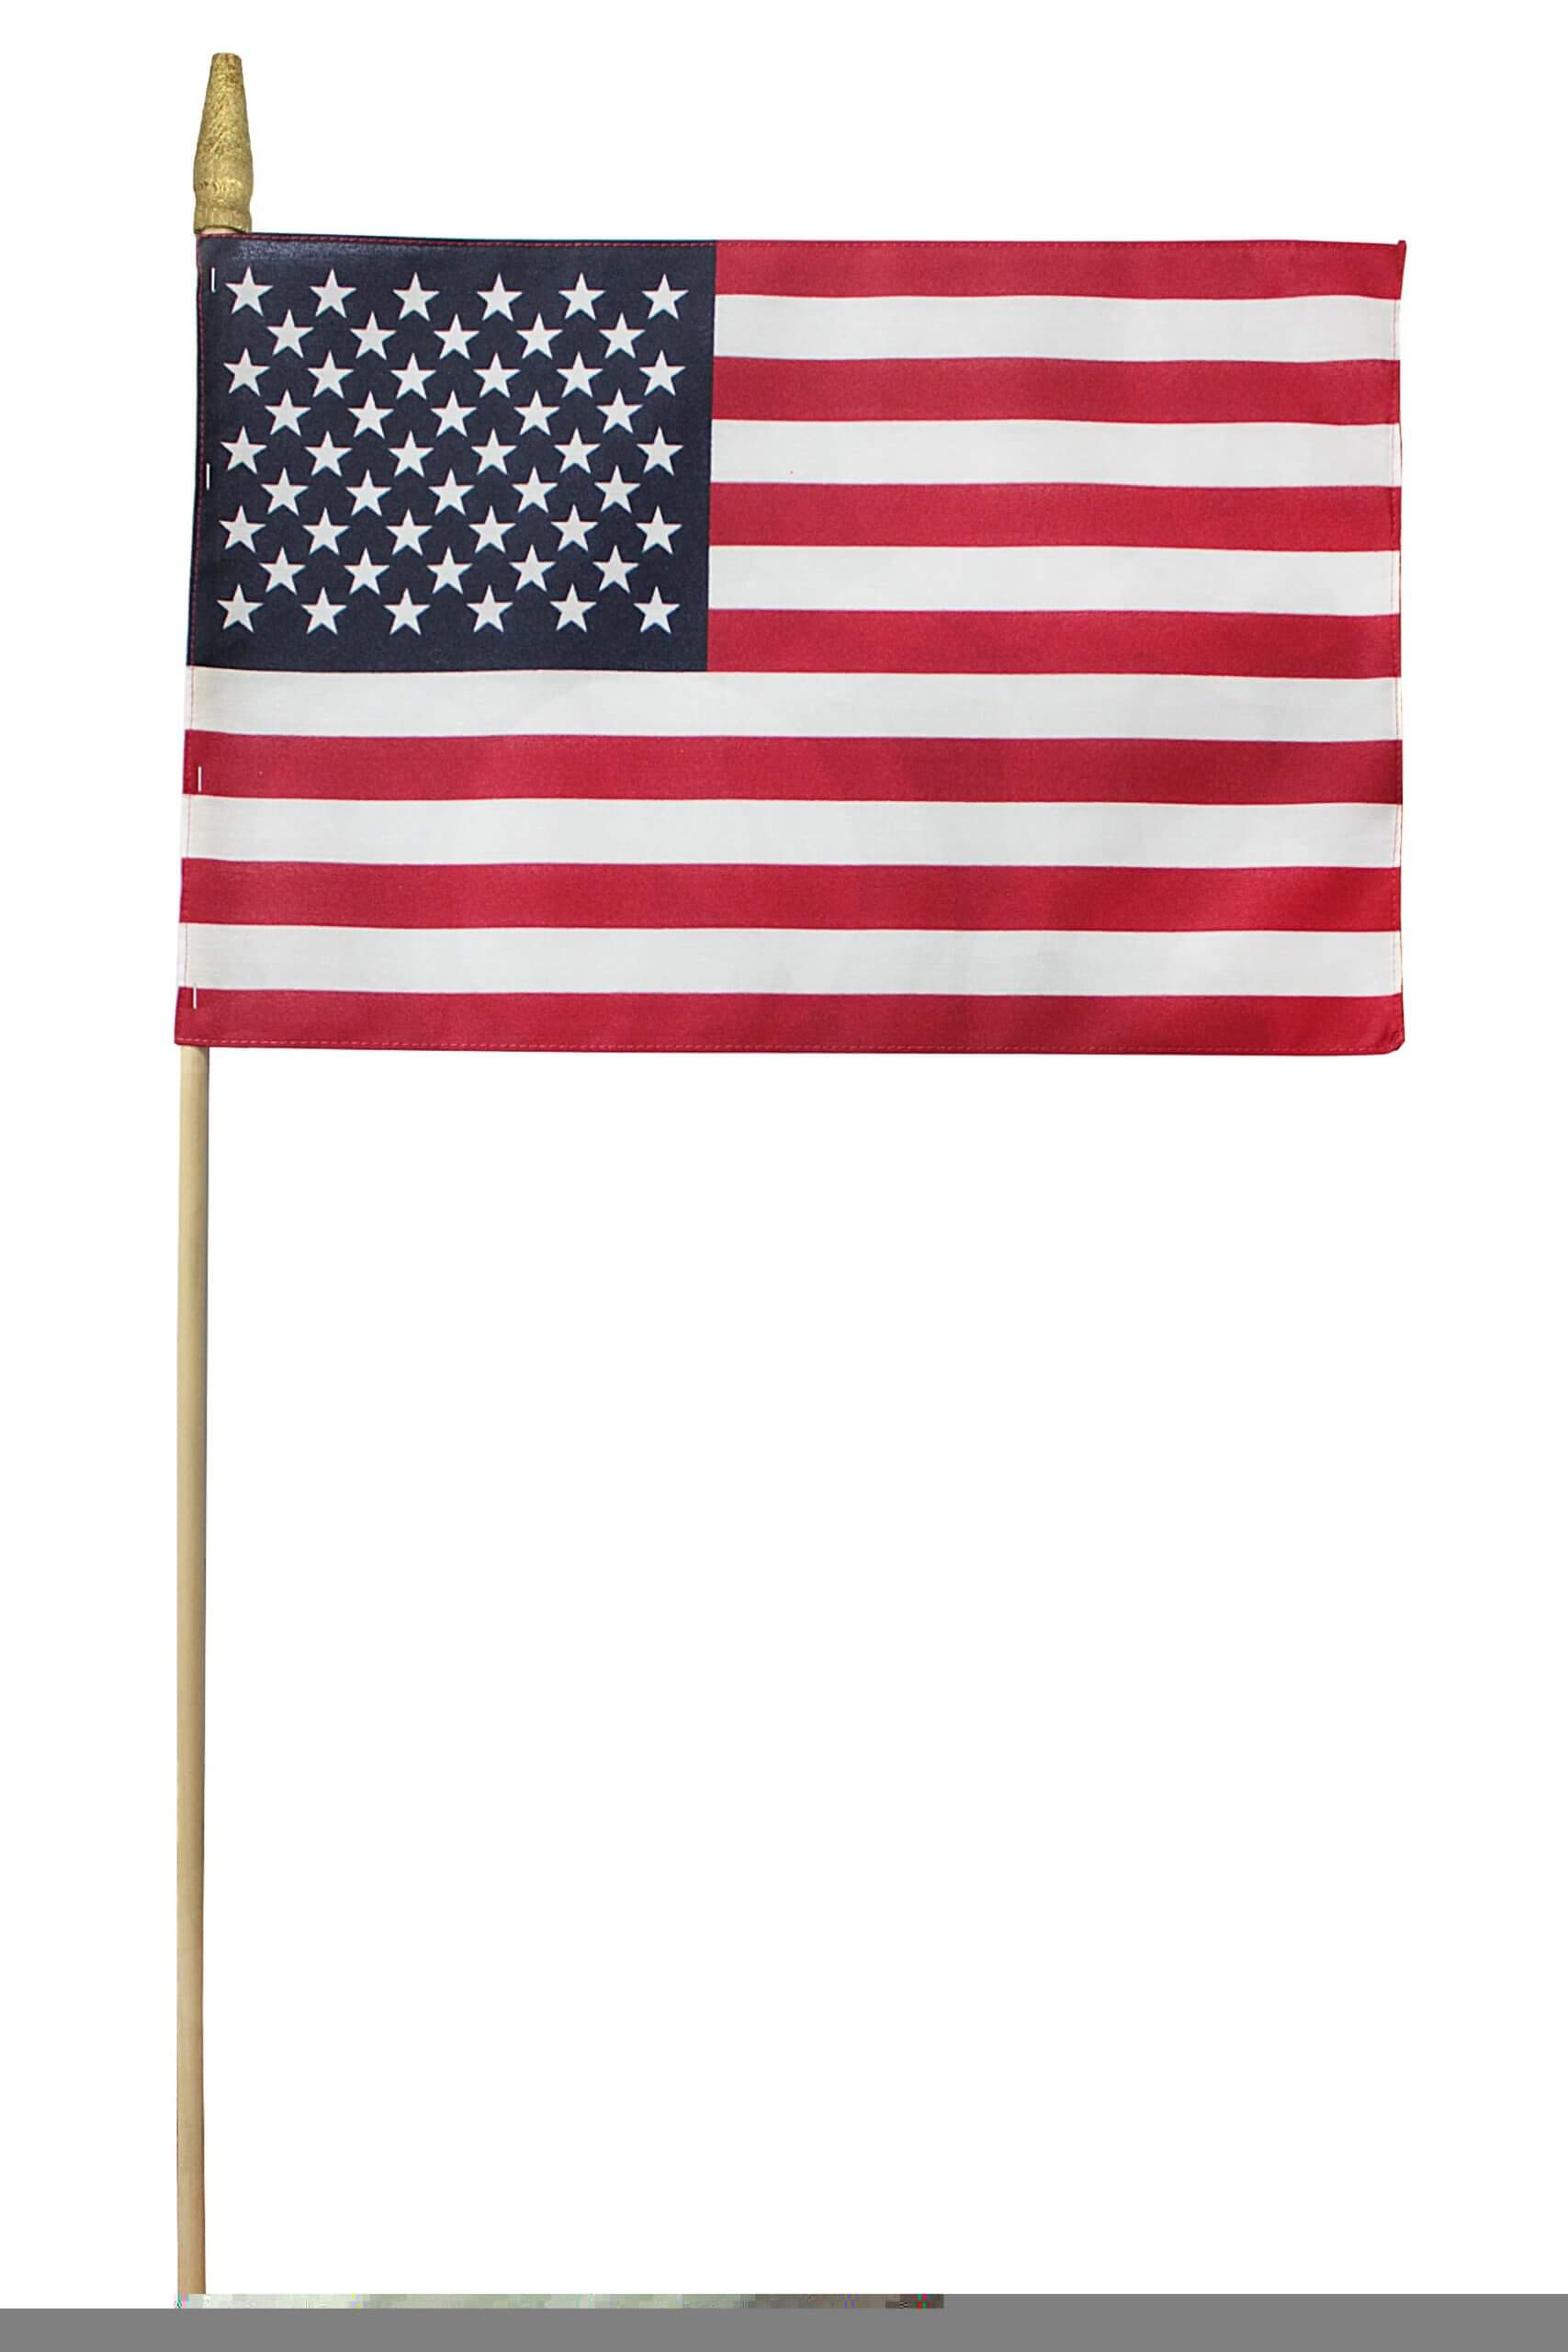 A 12" x 18" US Cemetery Flag for Veteran Grace Markers 3/8" x 30" wood dowel and a Gold Spear Tip. Made in the USA. Action Flag